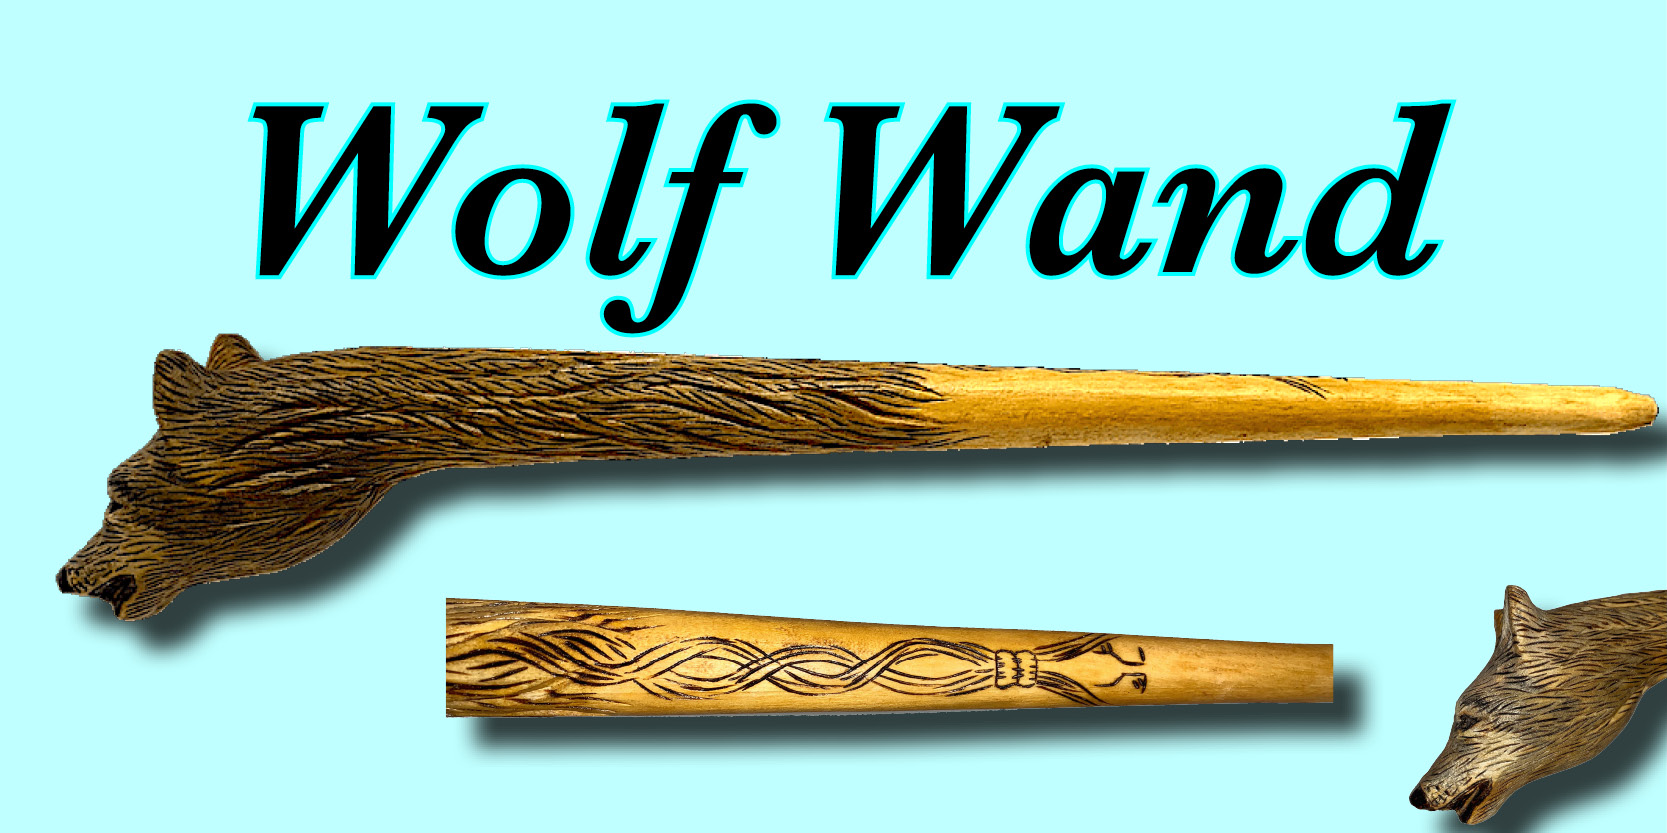 Wolf Wand, Harry Potter Fan carving, very cool hand-carved wand out of hardwood.